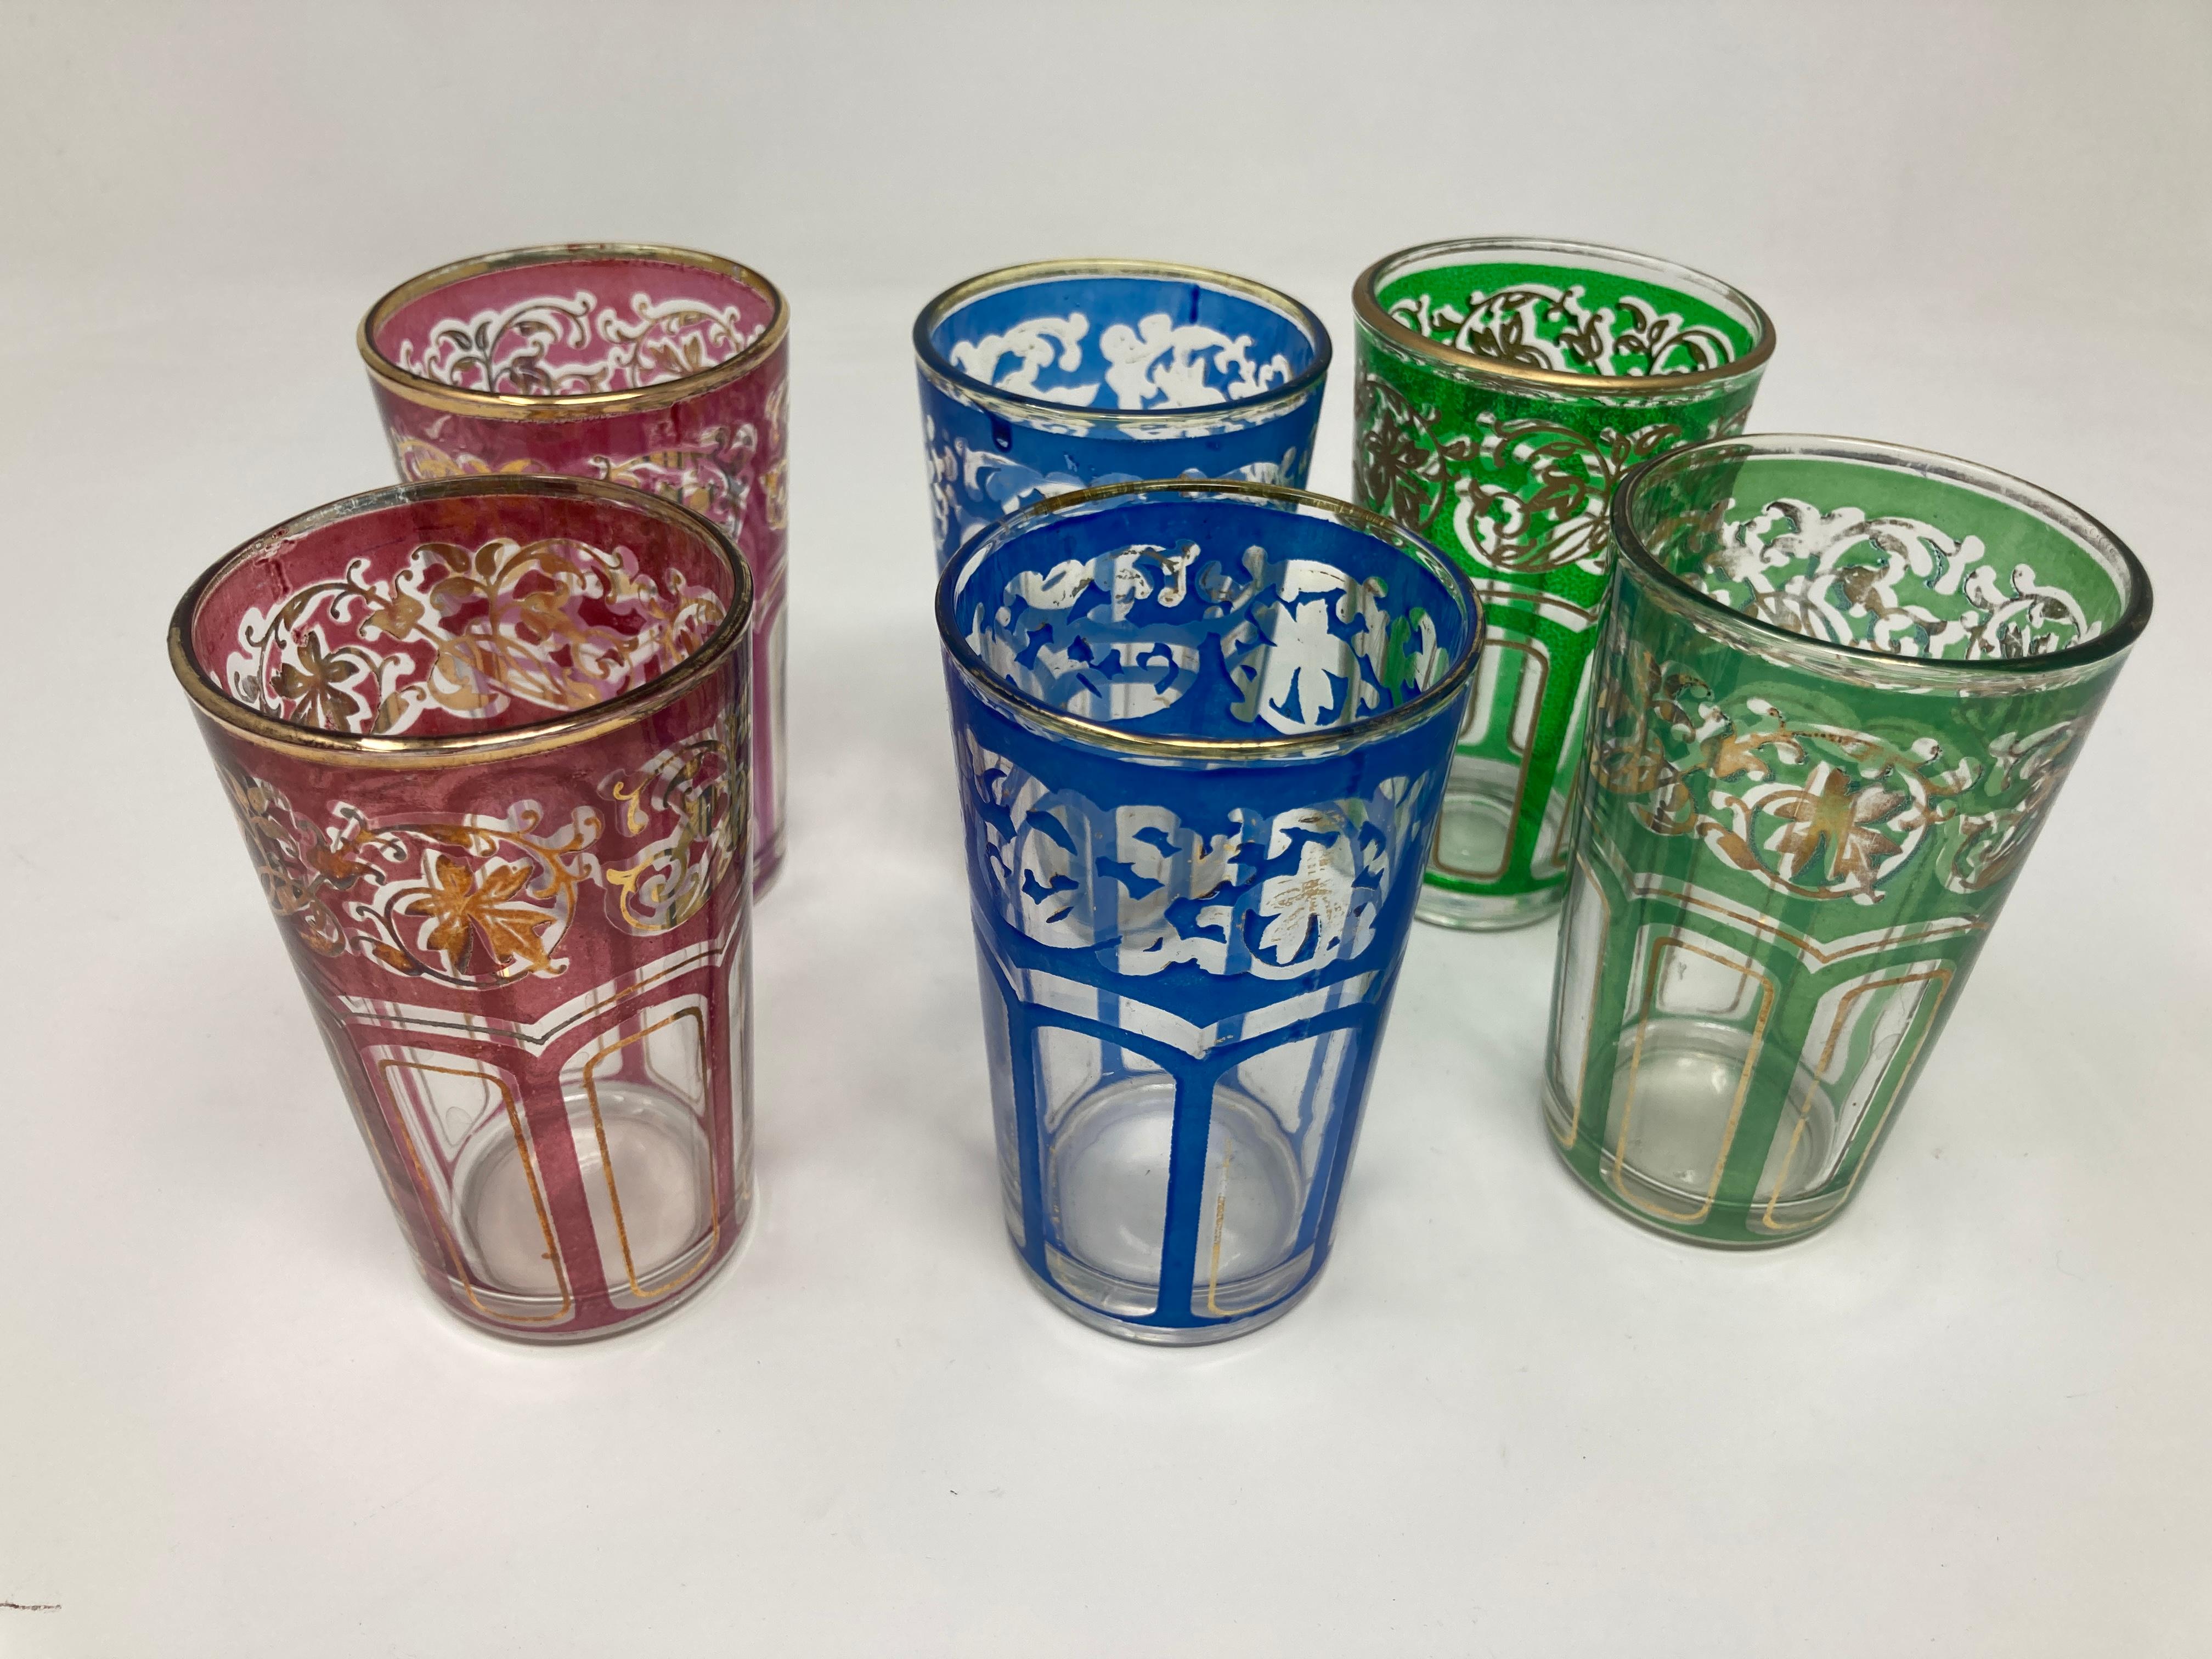 Set of six vintage Moroccan colored glasses with gold raised Moorish design.
Decorated with a classical gold and pattern Moorish frieze.
Use these elegant vintage glasses for Moroccan tea, or any hot or cold drink.
Perfect for the holidays and